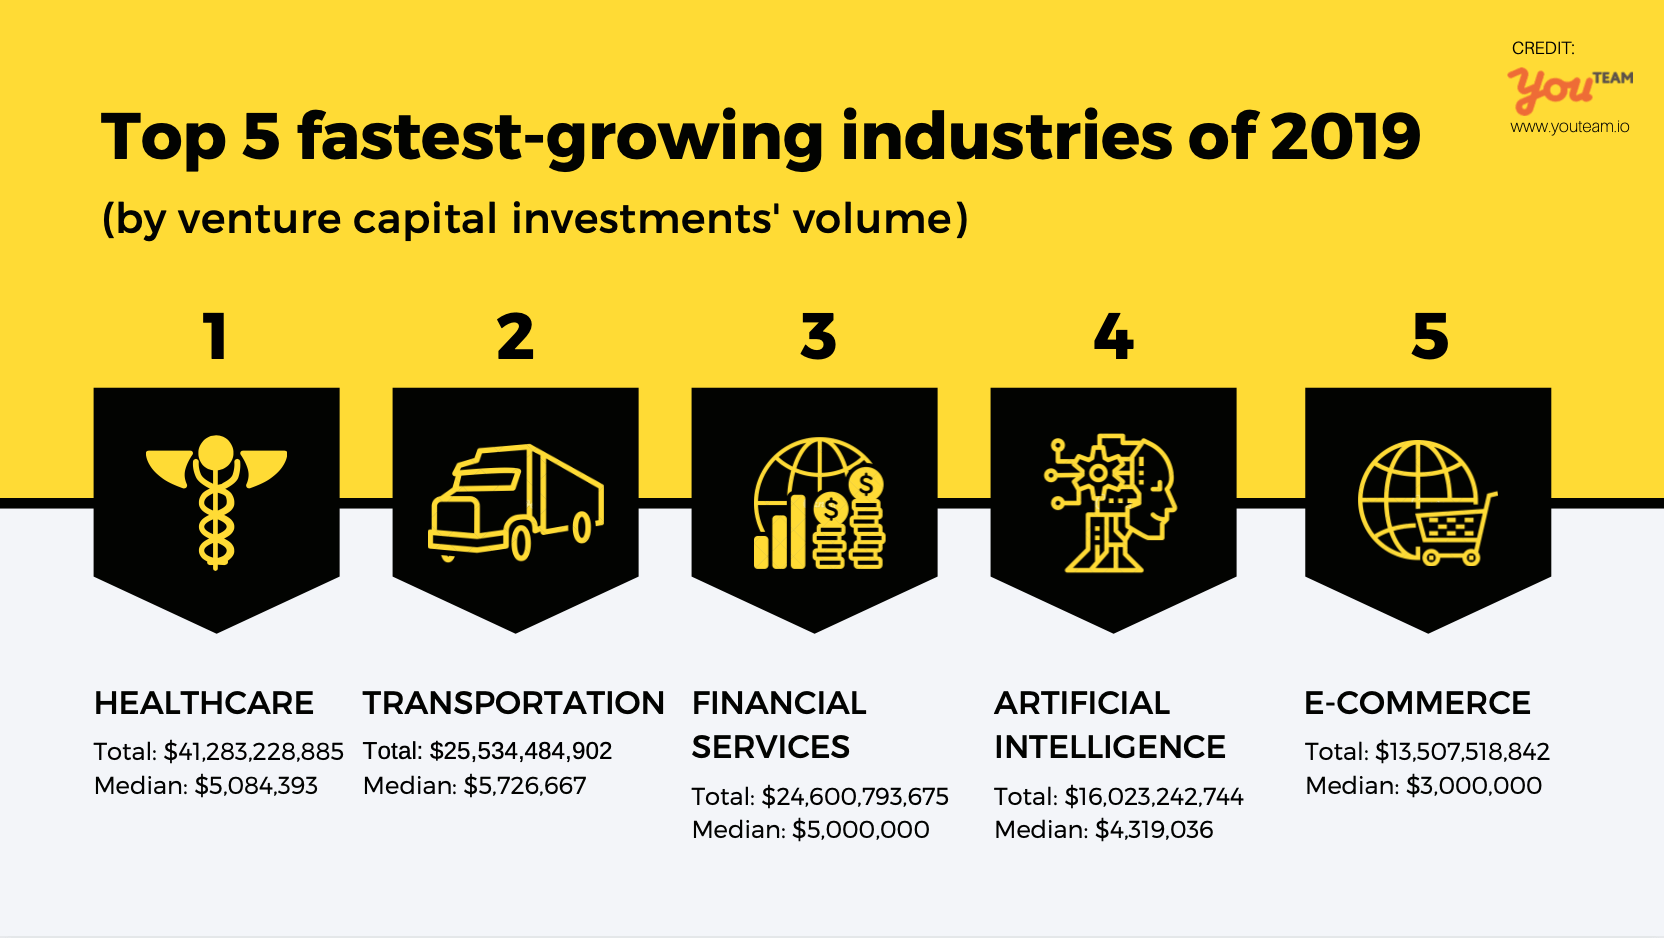 Top 5 fastestgrowing Industries of 2019 by money invested